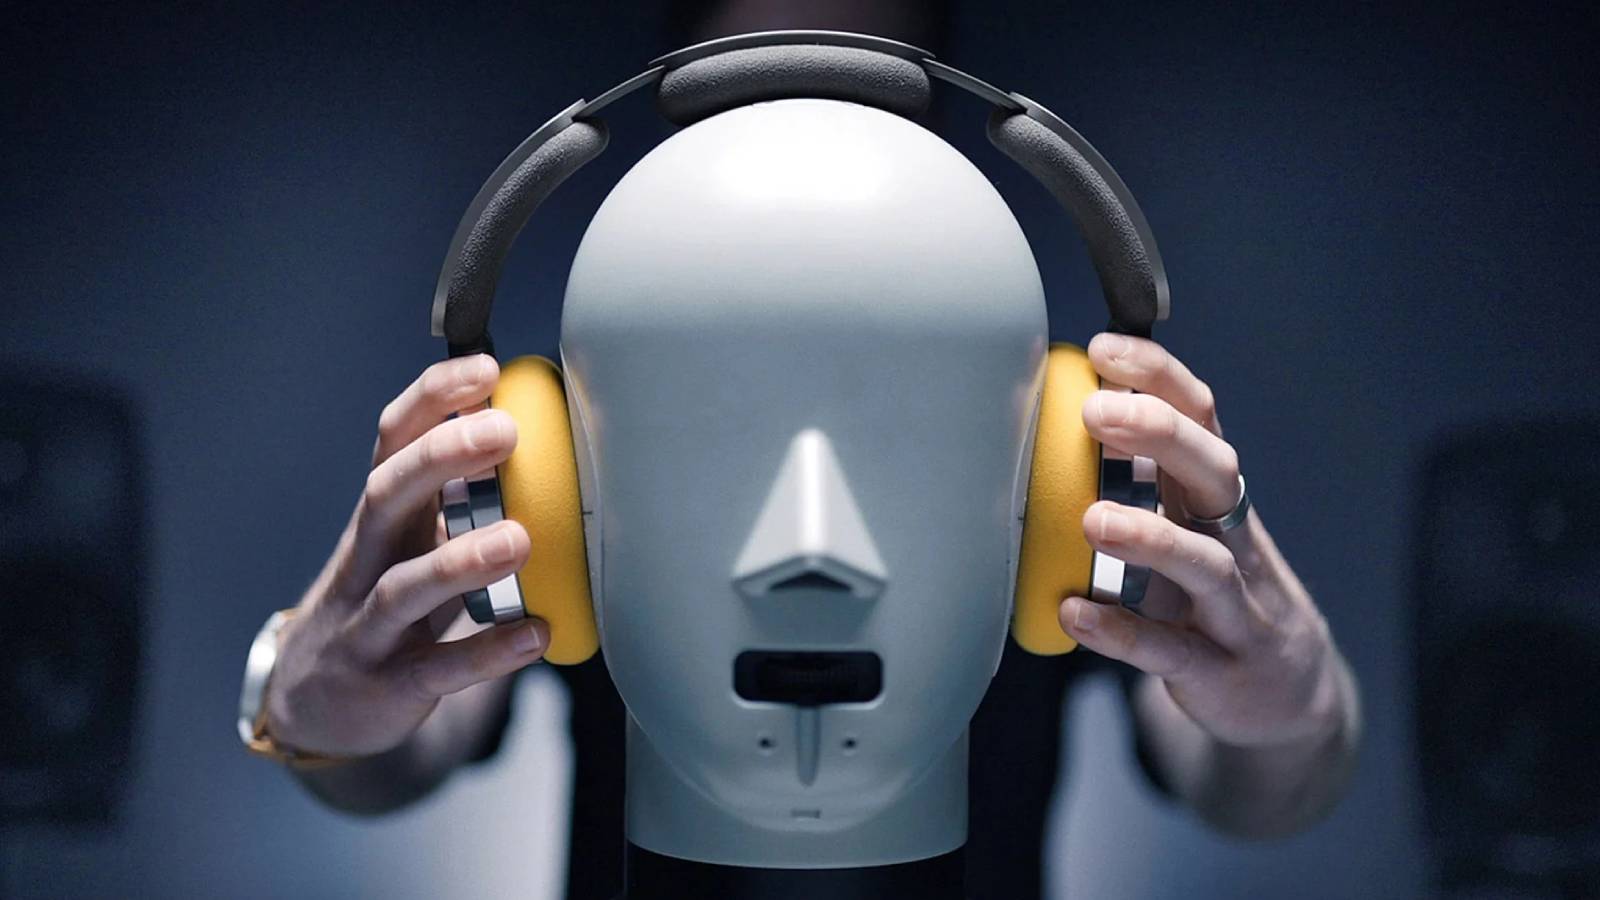 Promo image of the Dyson OnTrac headset.